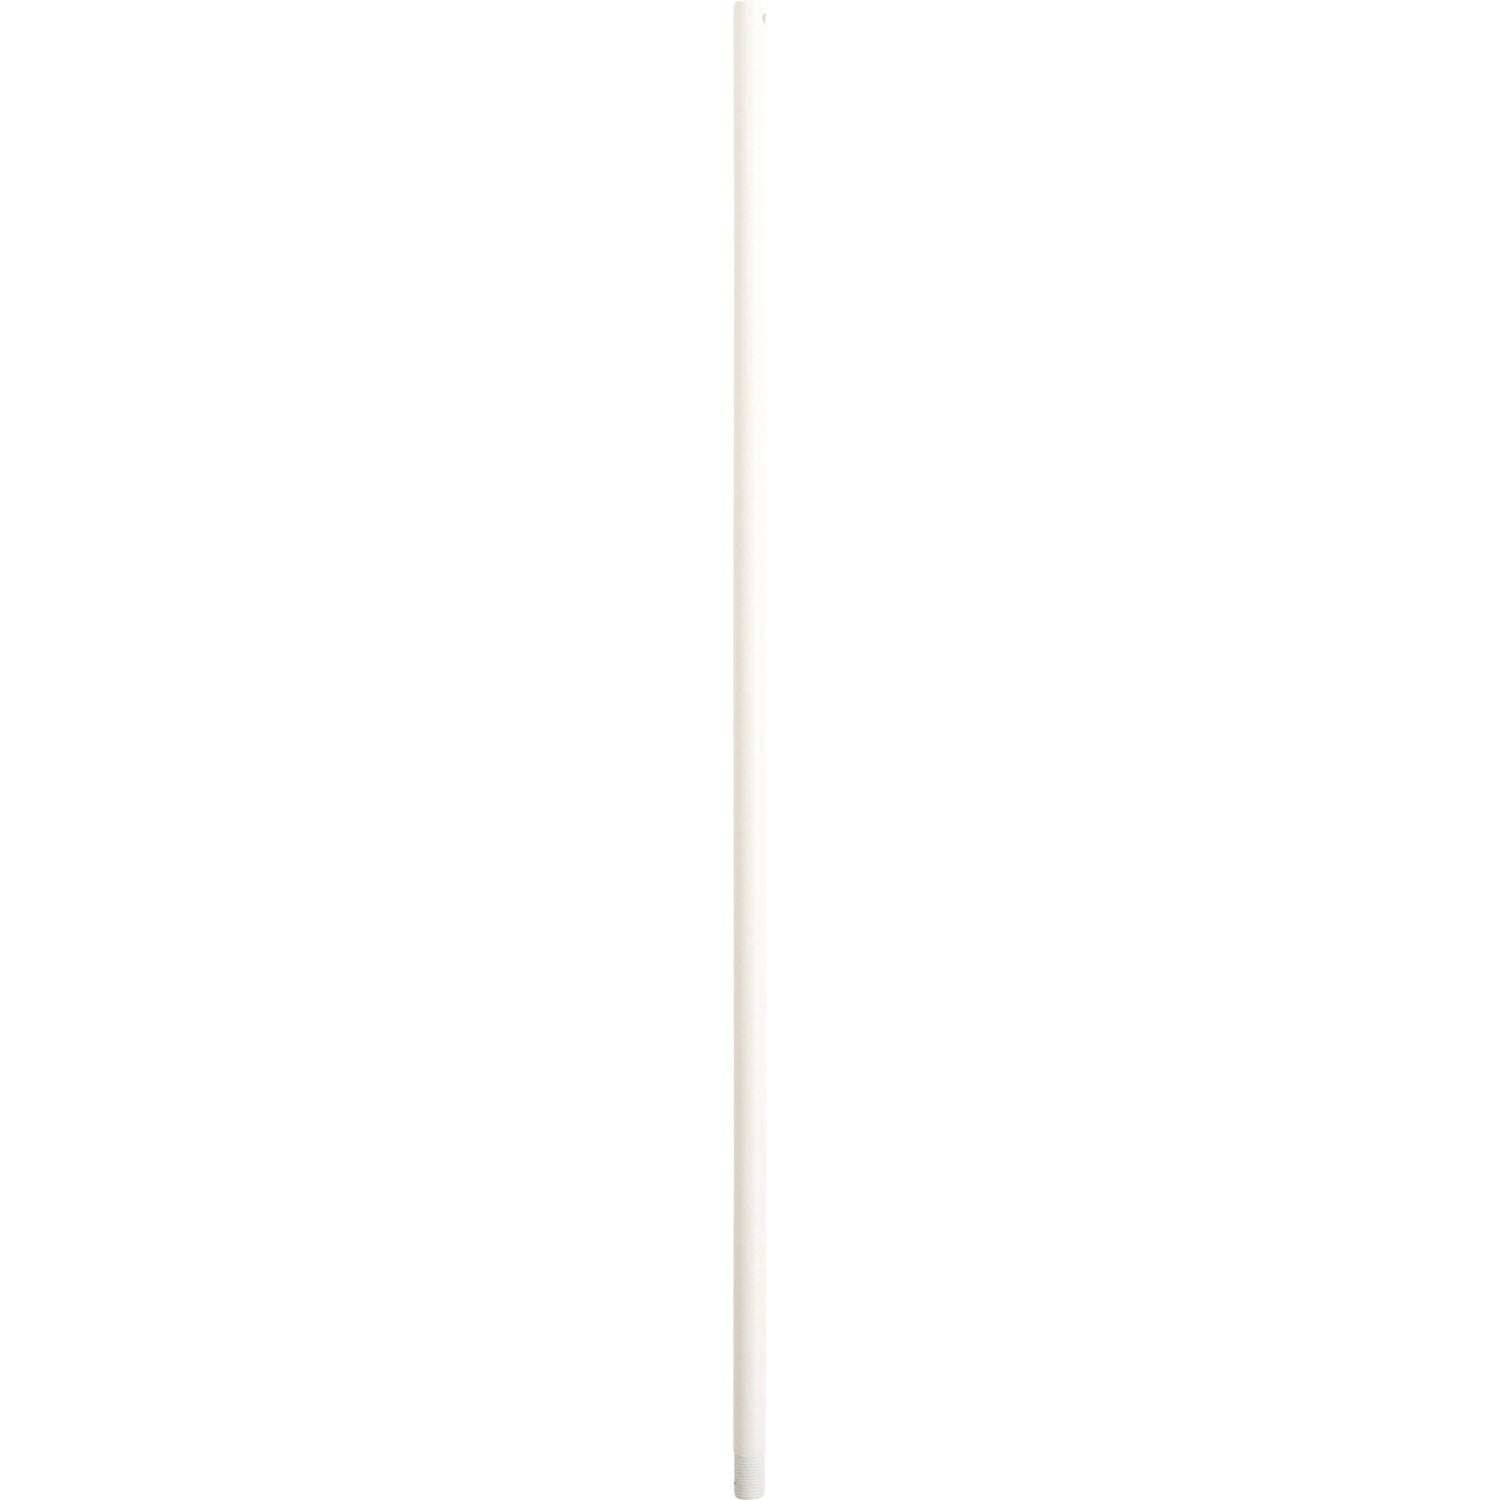 Quorum - 6-3667 - Downrod - 36 in. Downrods - Antique White